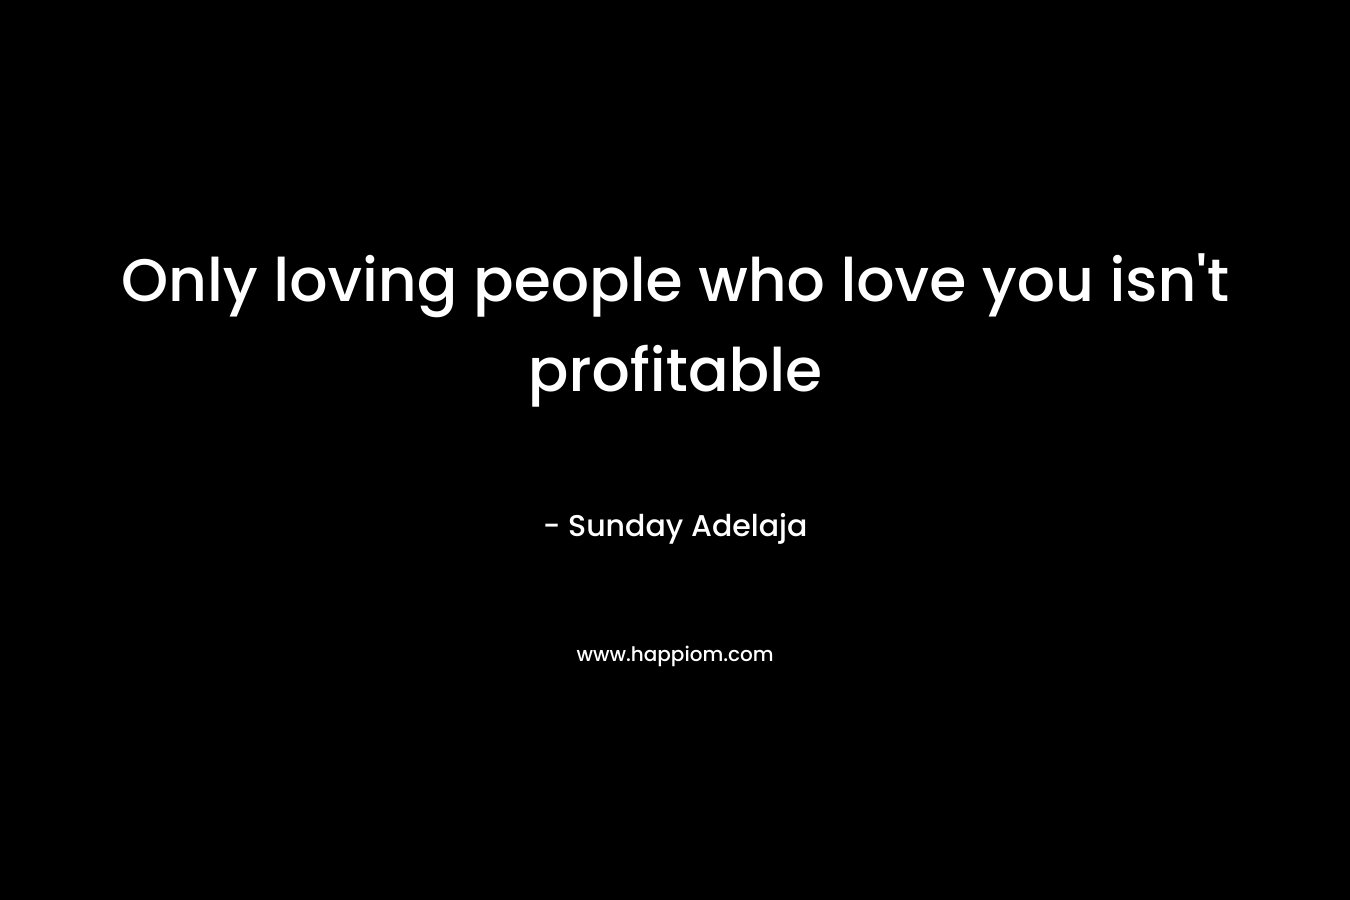 Only loving people who love you isn't profitable